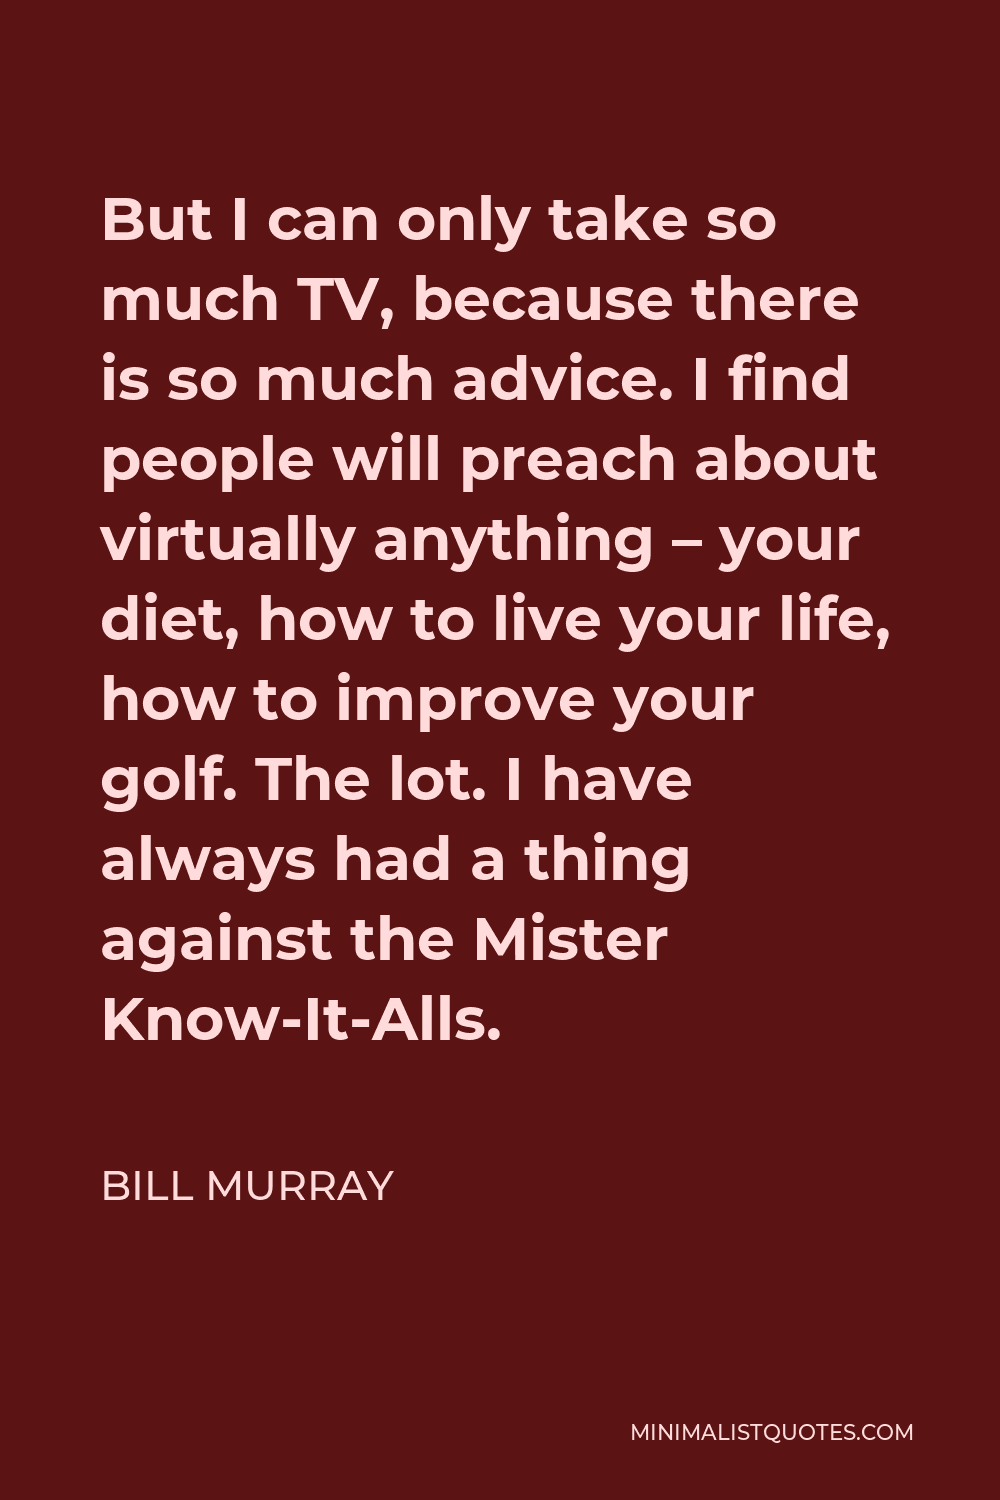 Bill Murray Quote - But I can only take so much TV, because there is so much advice. I find people will preach about virtually anything – your diet, how to live your life, how to improve your golf. The lot. I have always had a thing against the Mister Know-It-Alls.